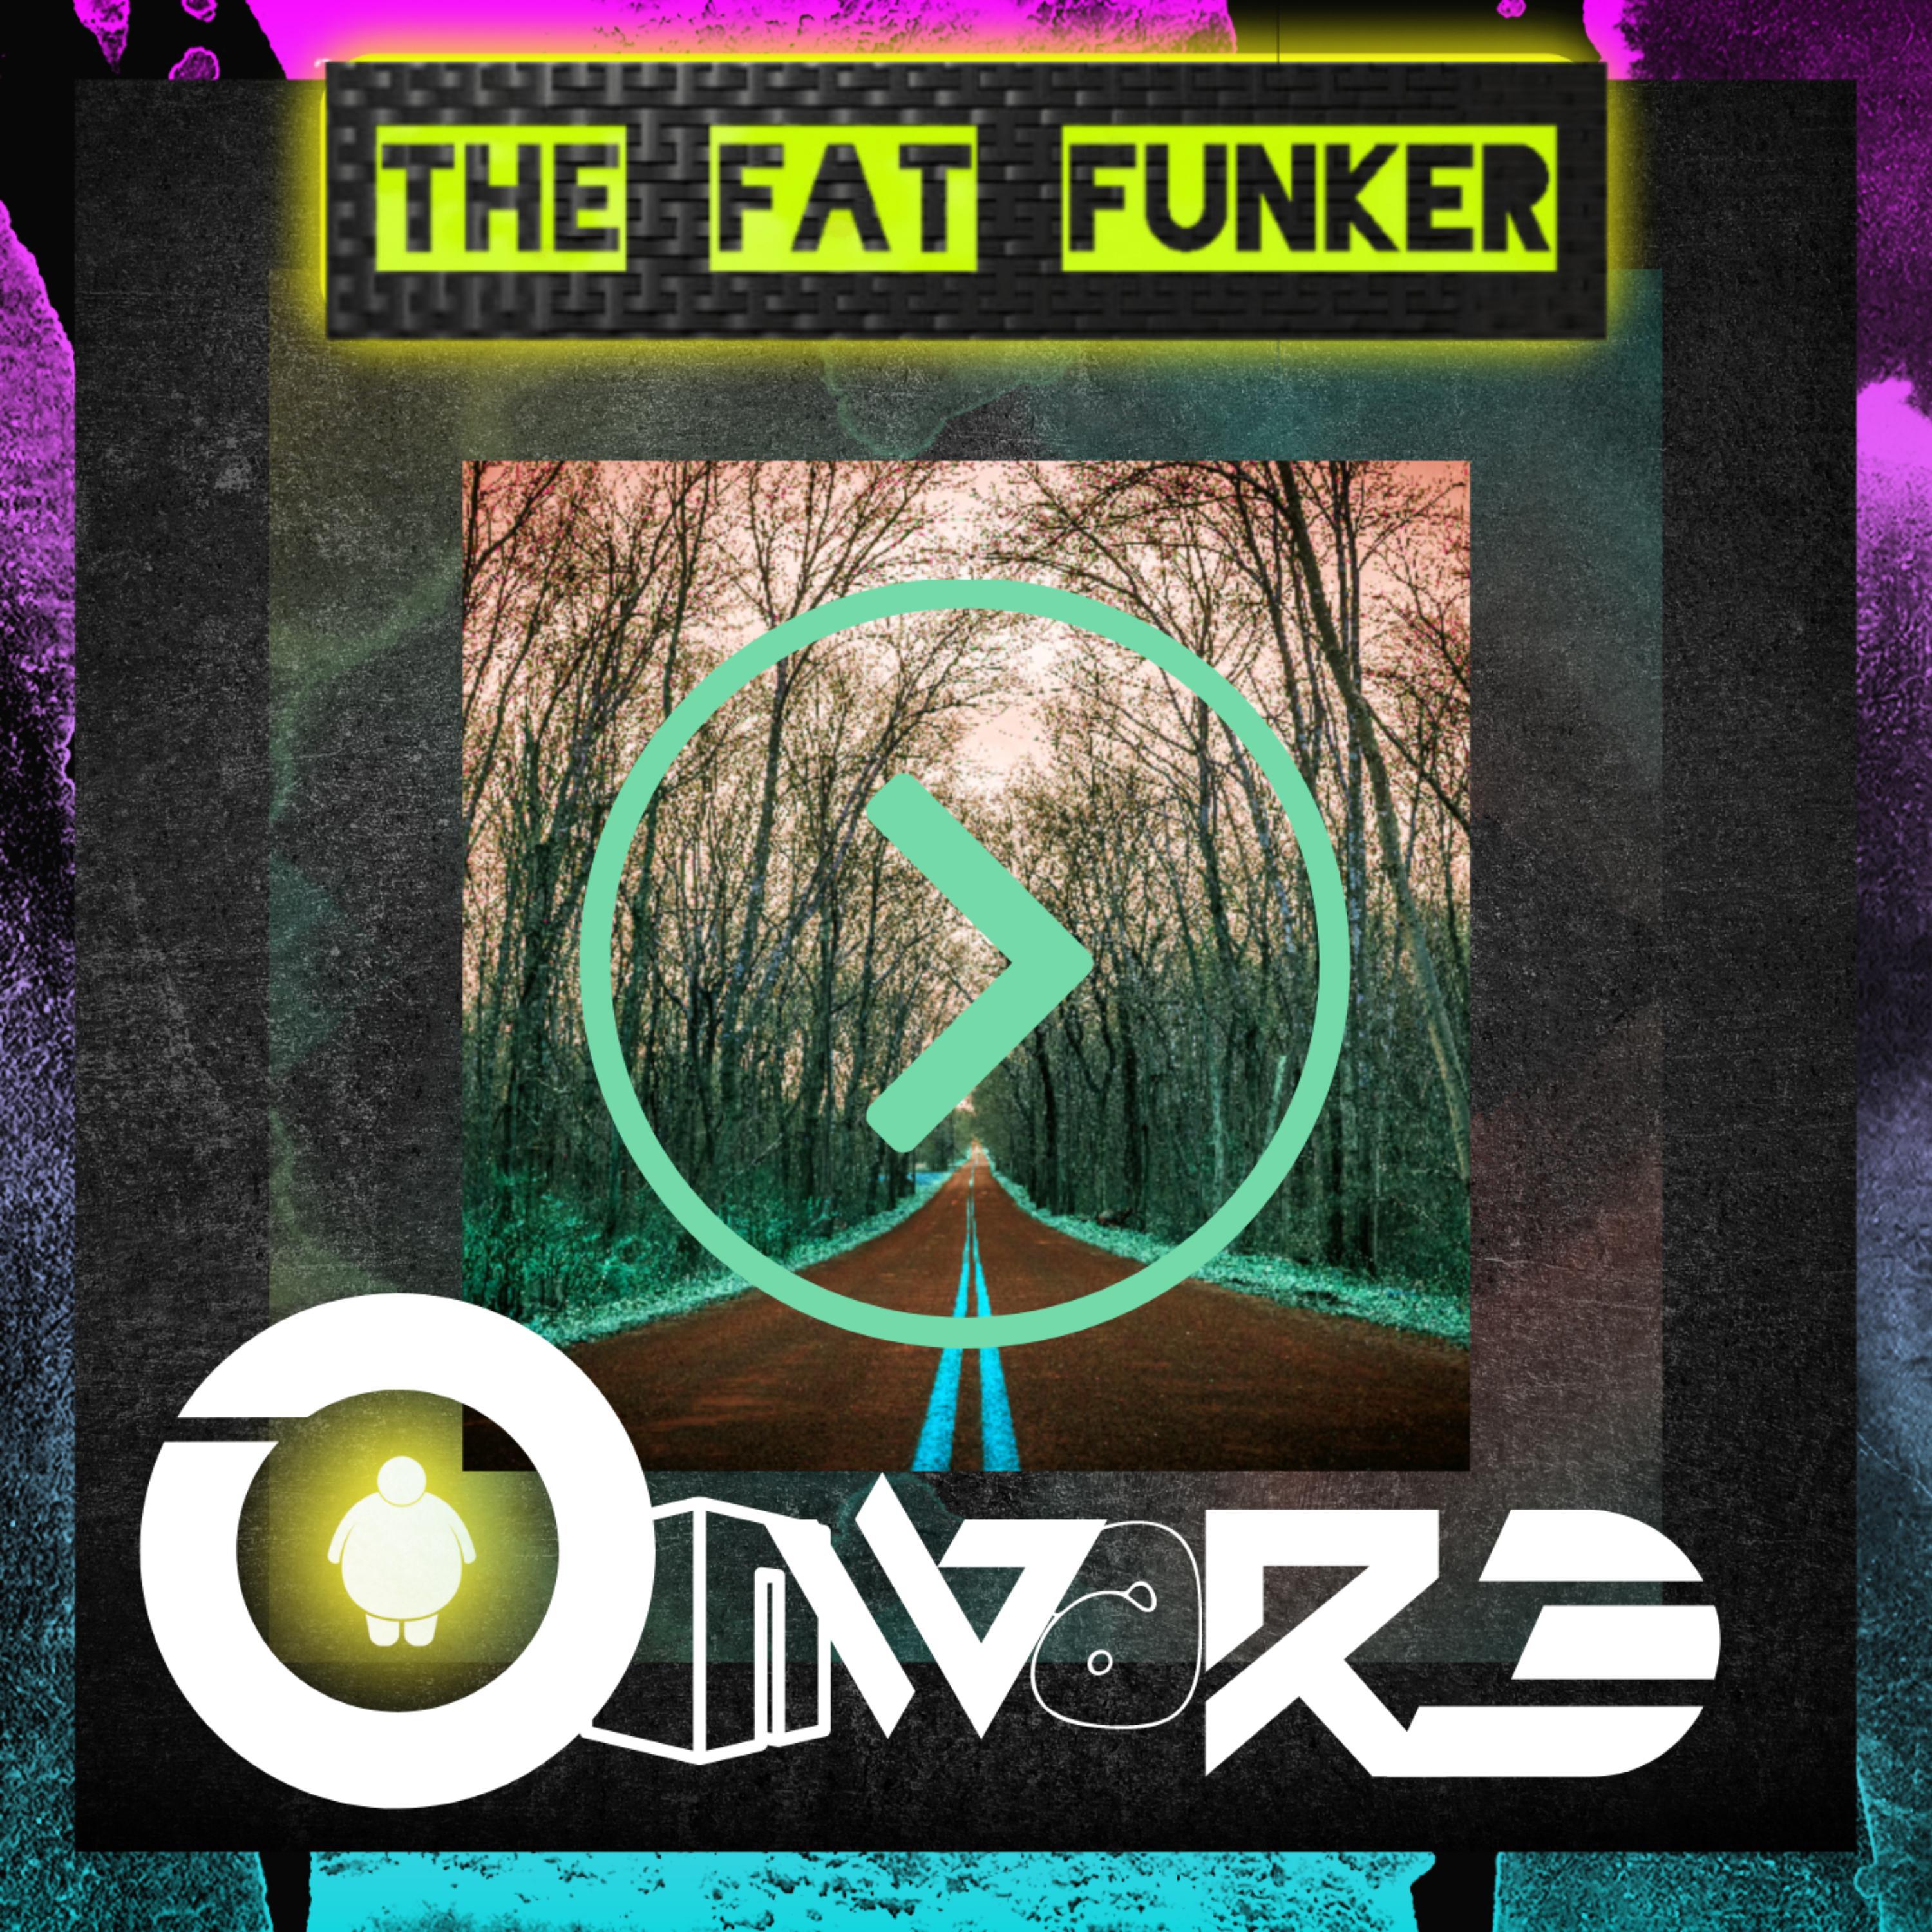 The Fat Funker - The Headcaver